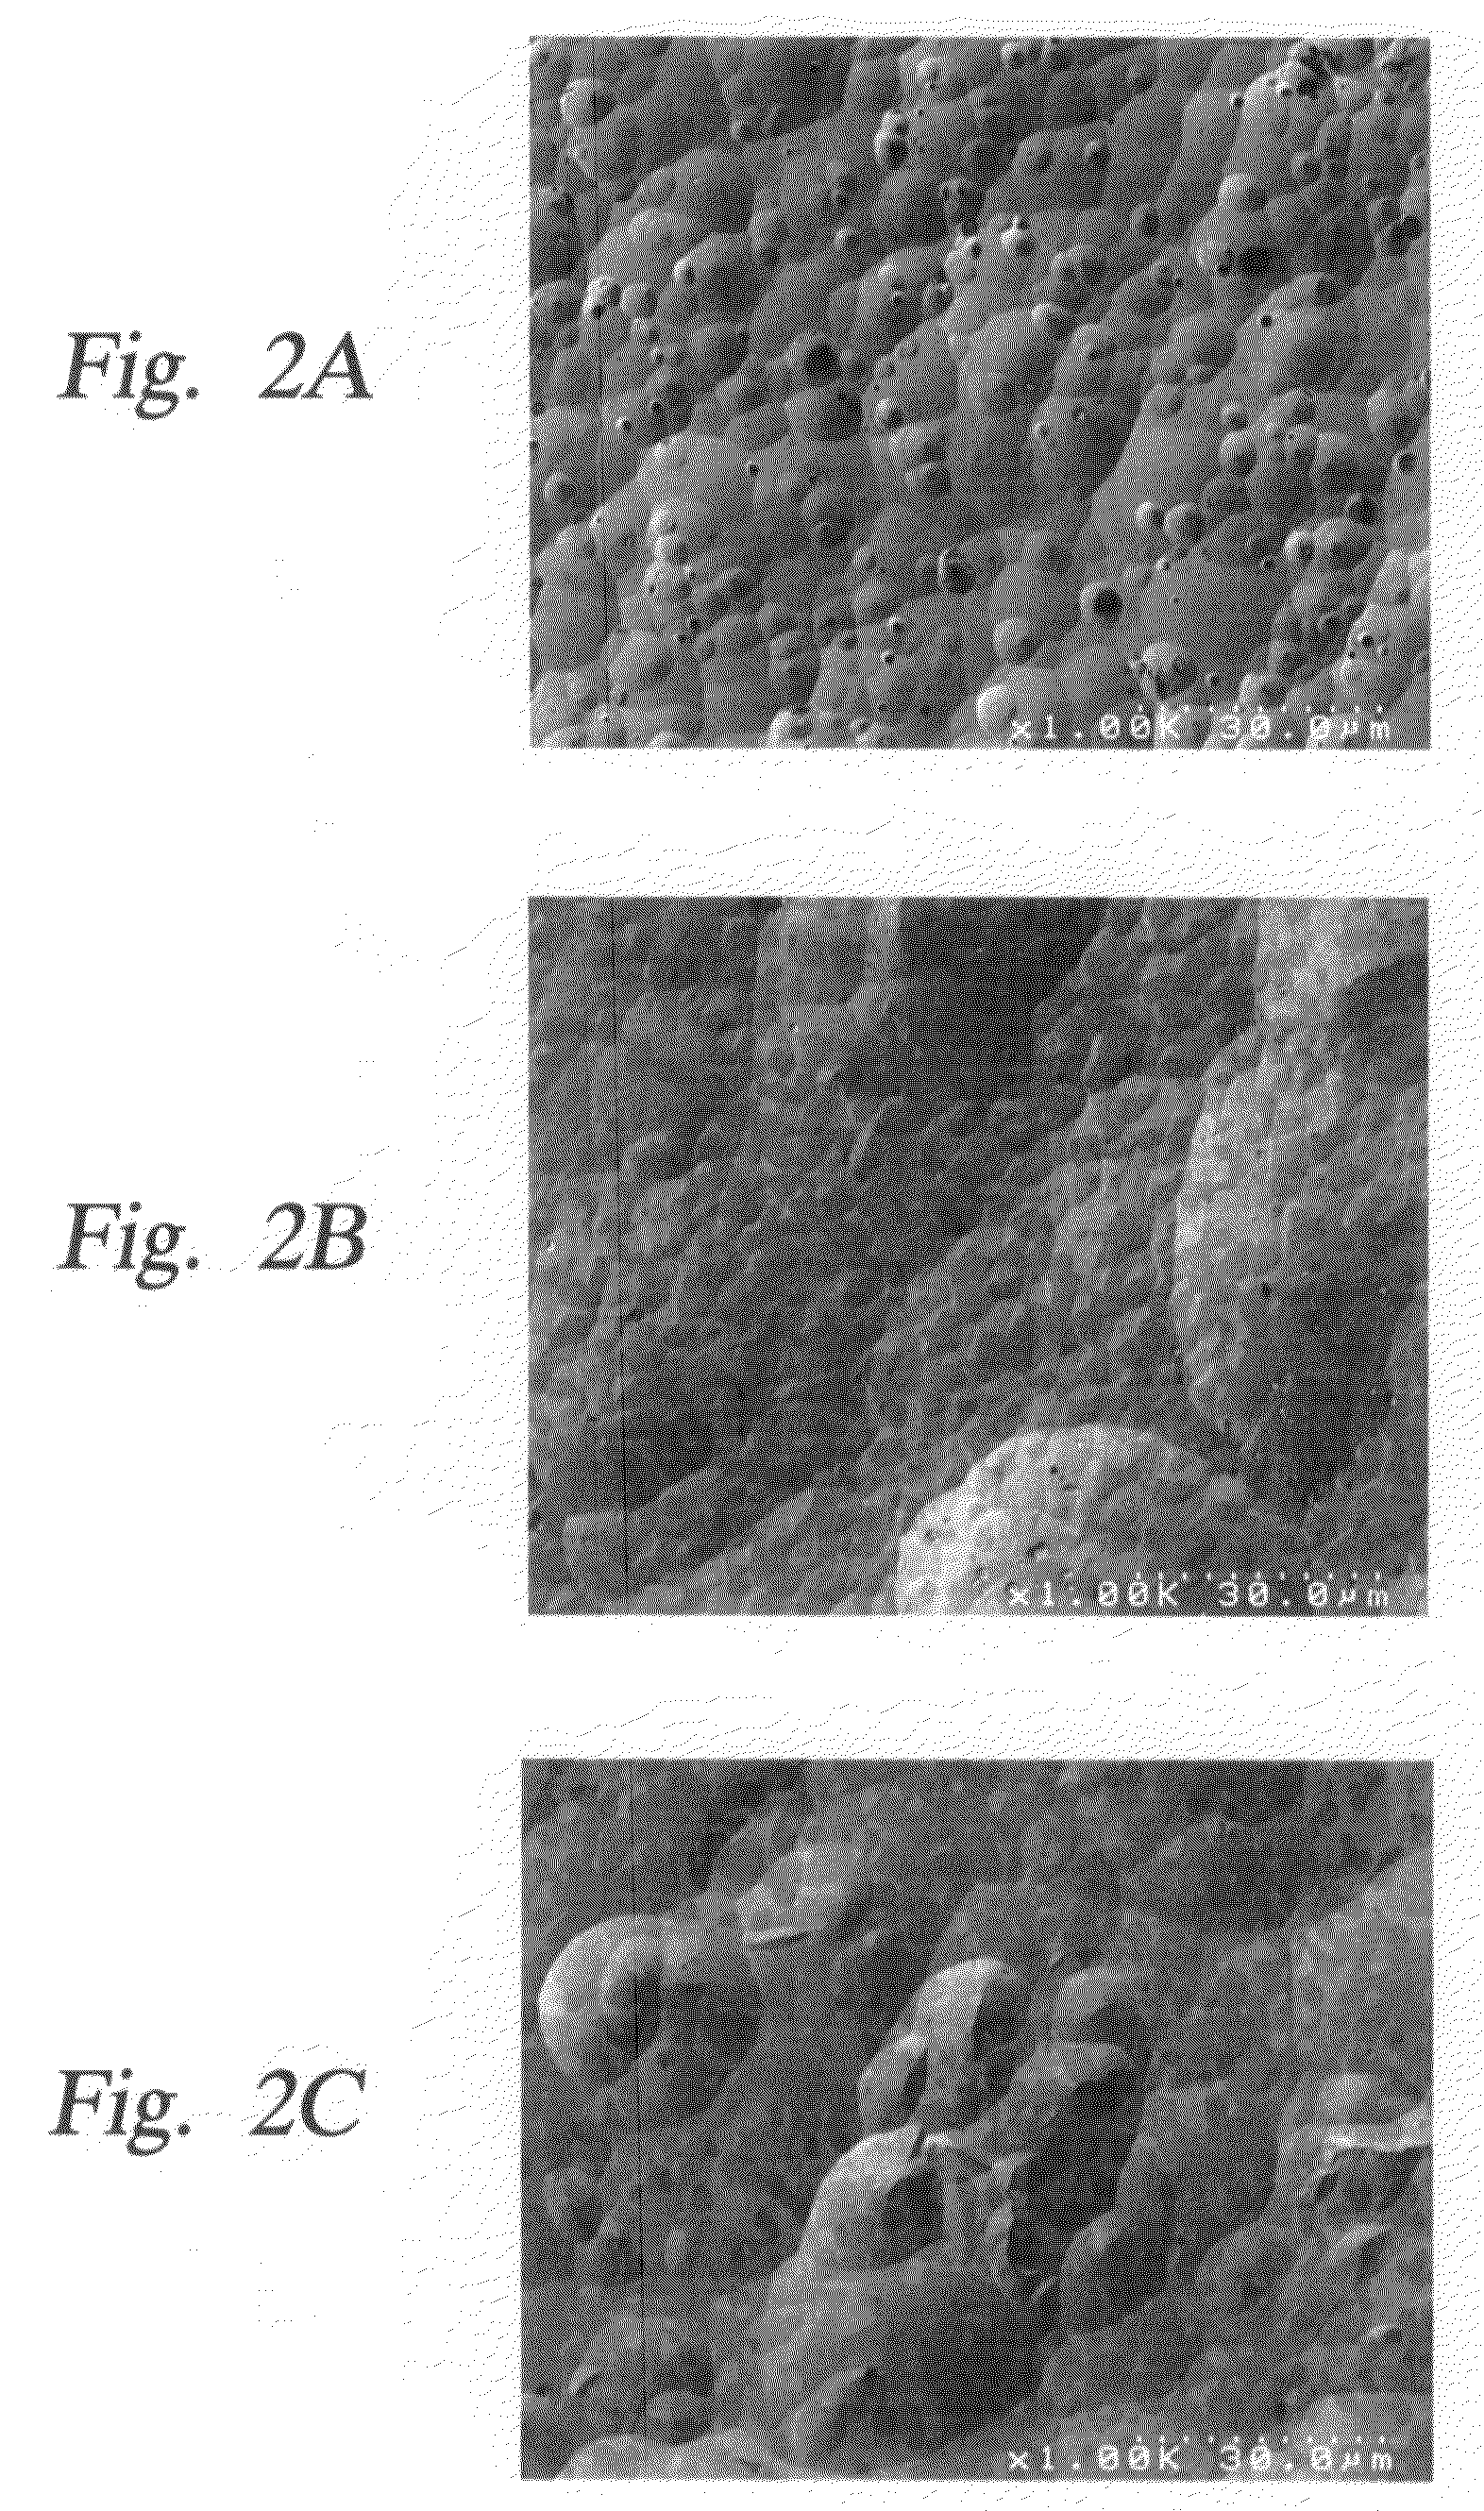 Method of reducing the erosion rate of semiconductor processing apparatus exposed to halogen-containing plasmas